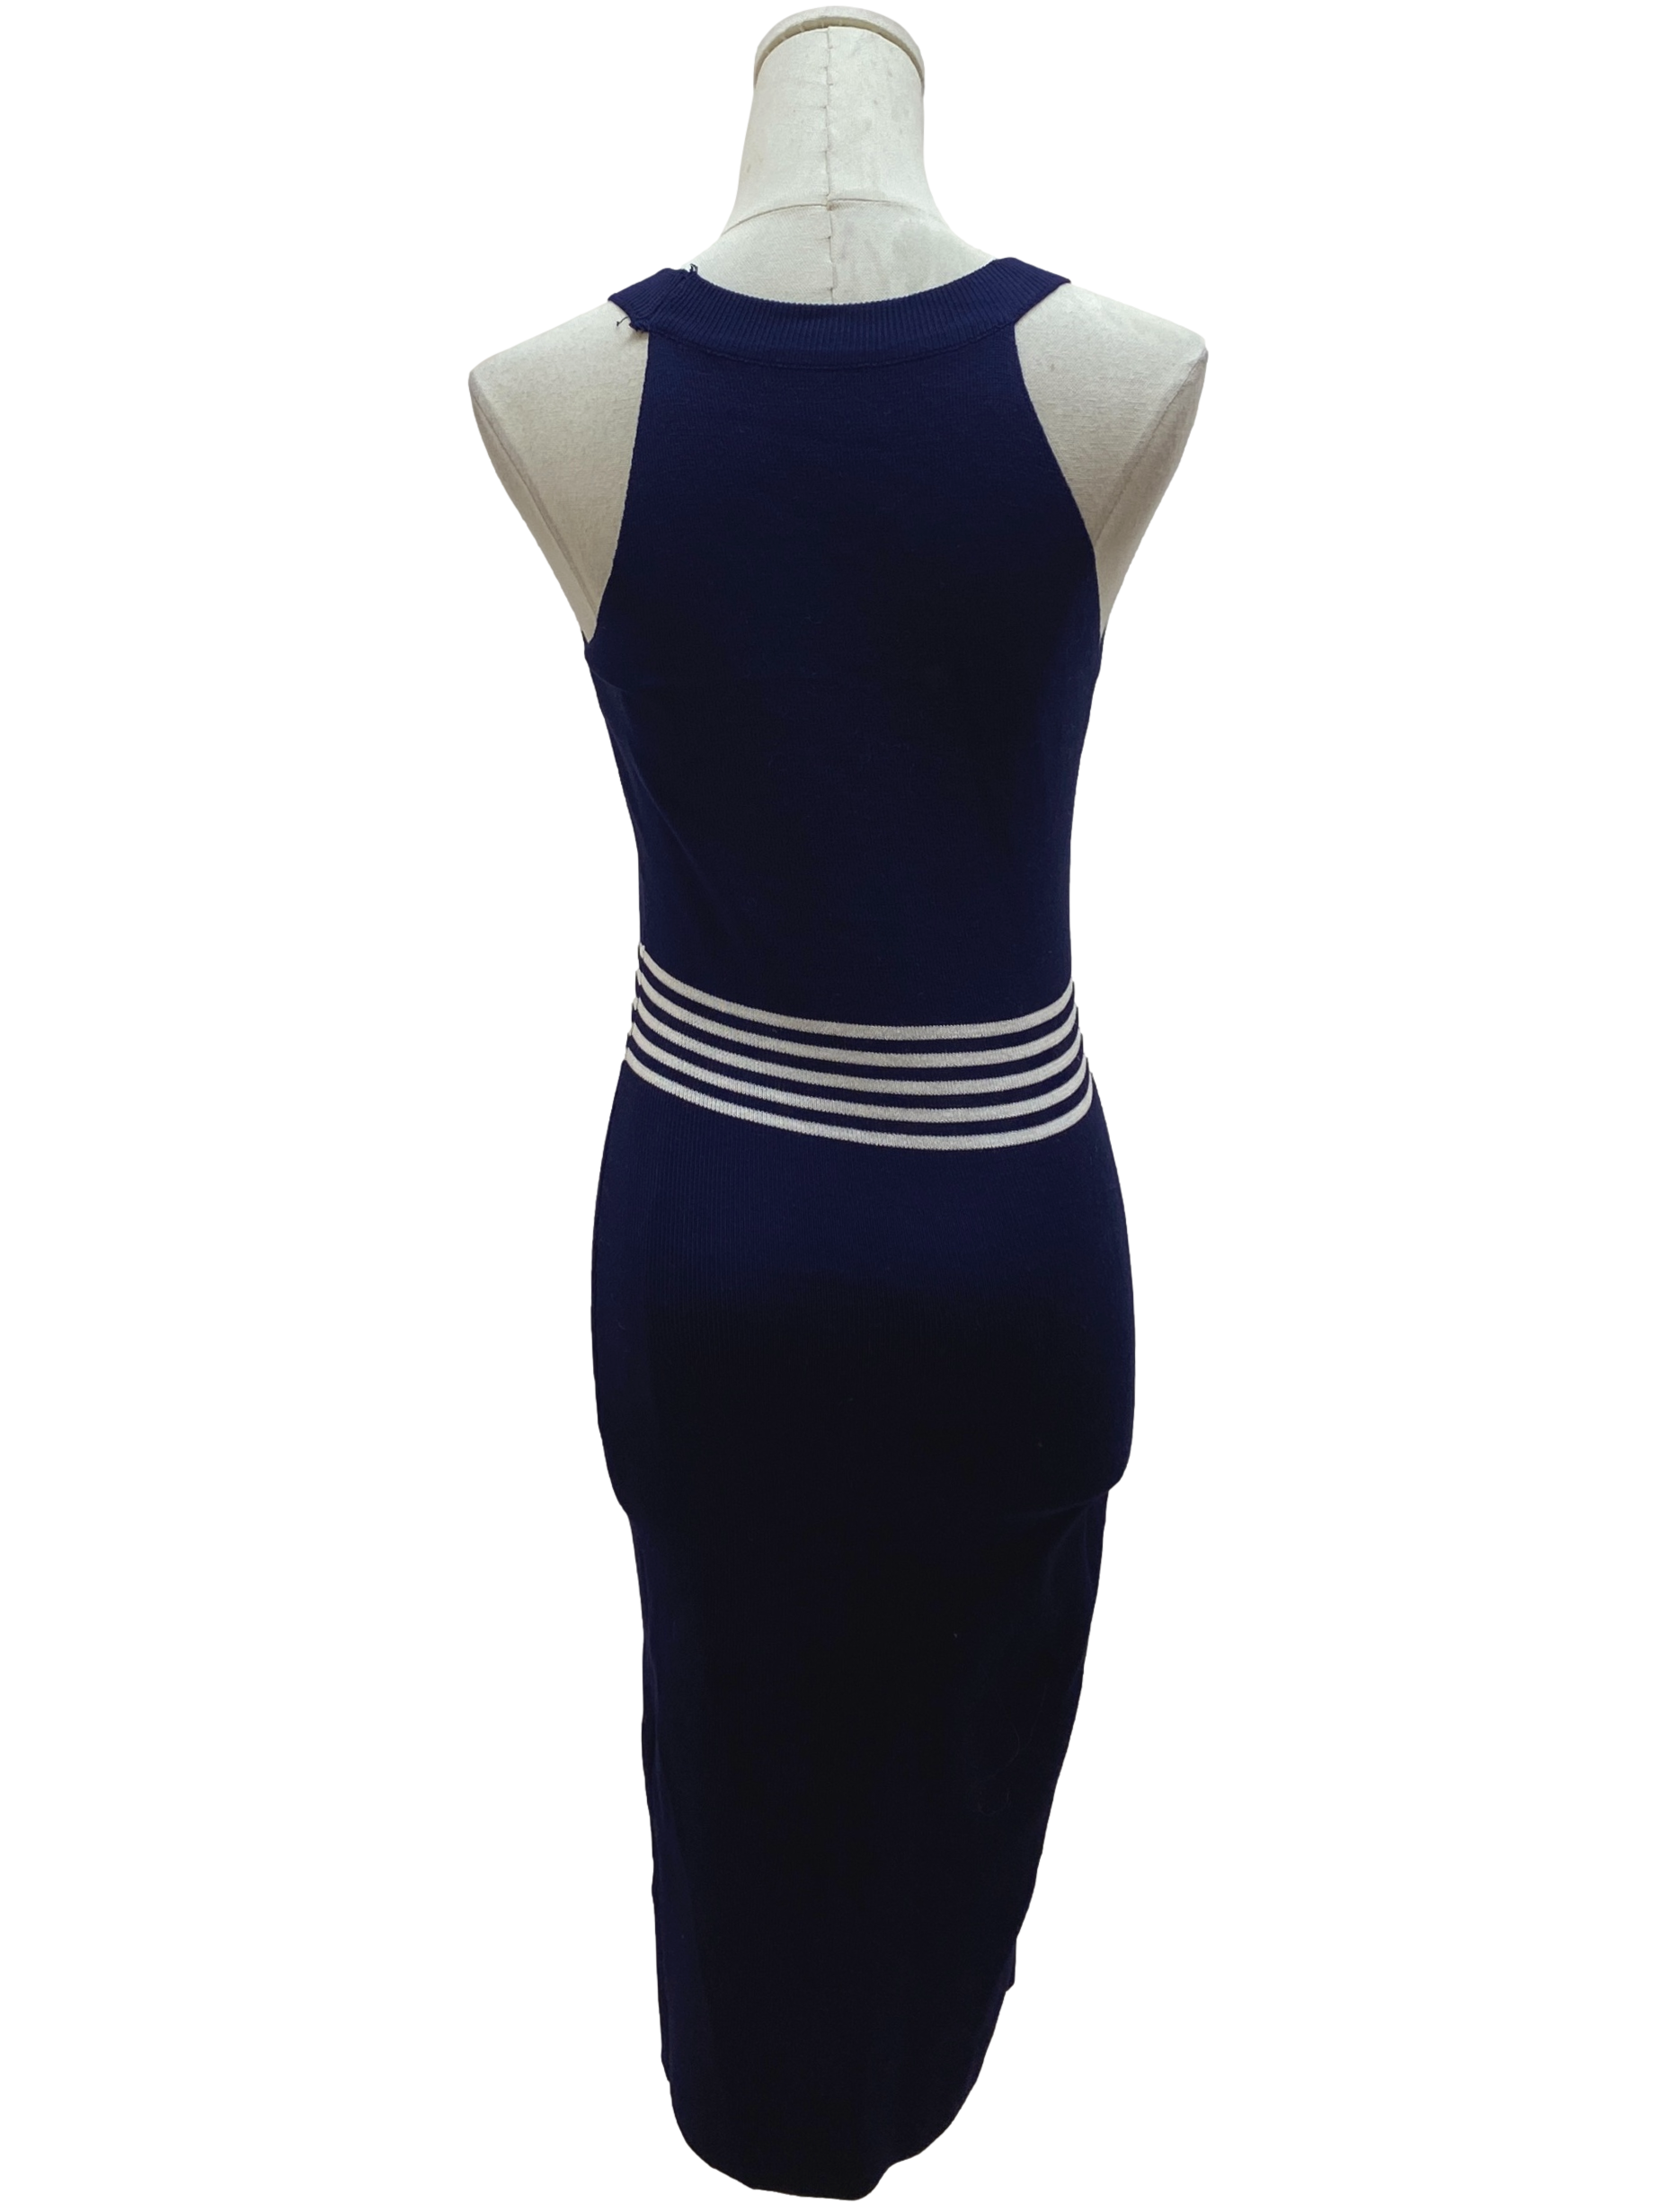 Admiral Blue Bodycon Knitted Dress